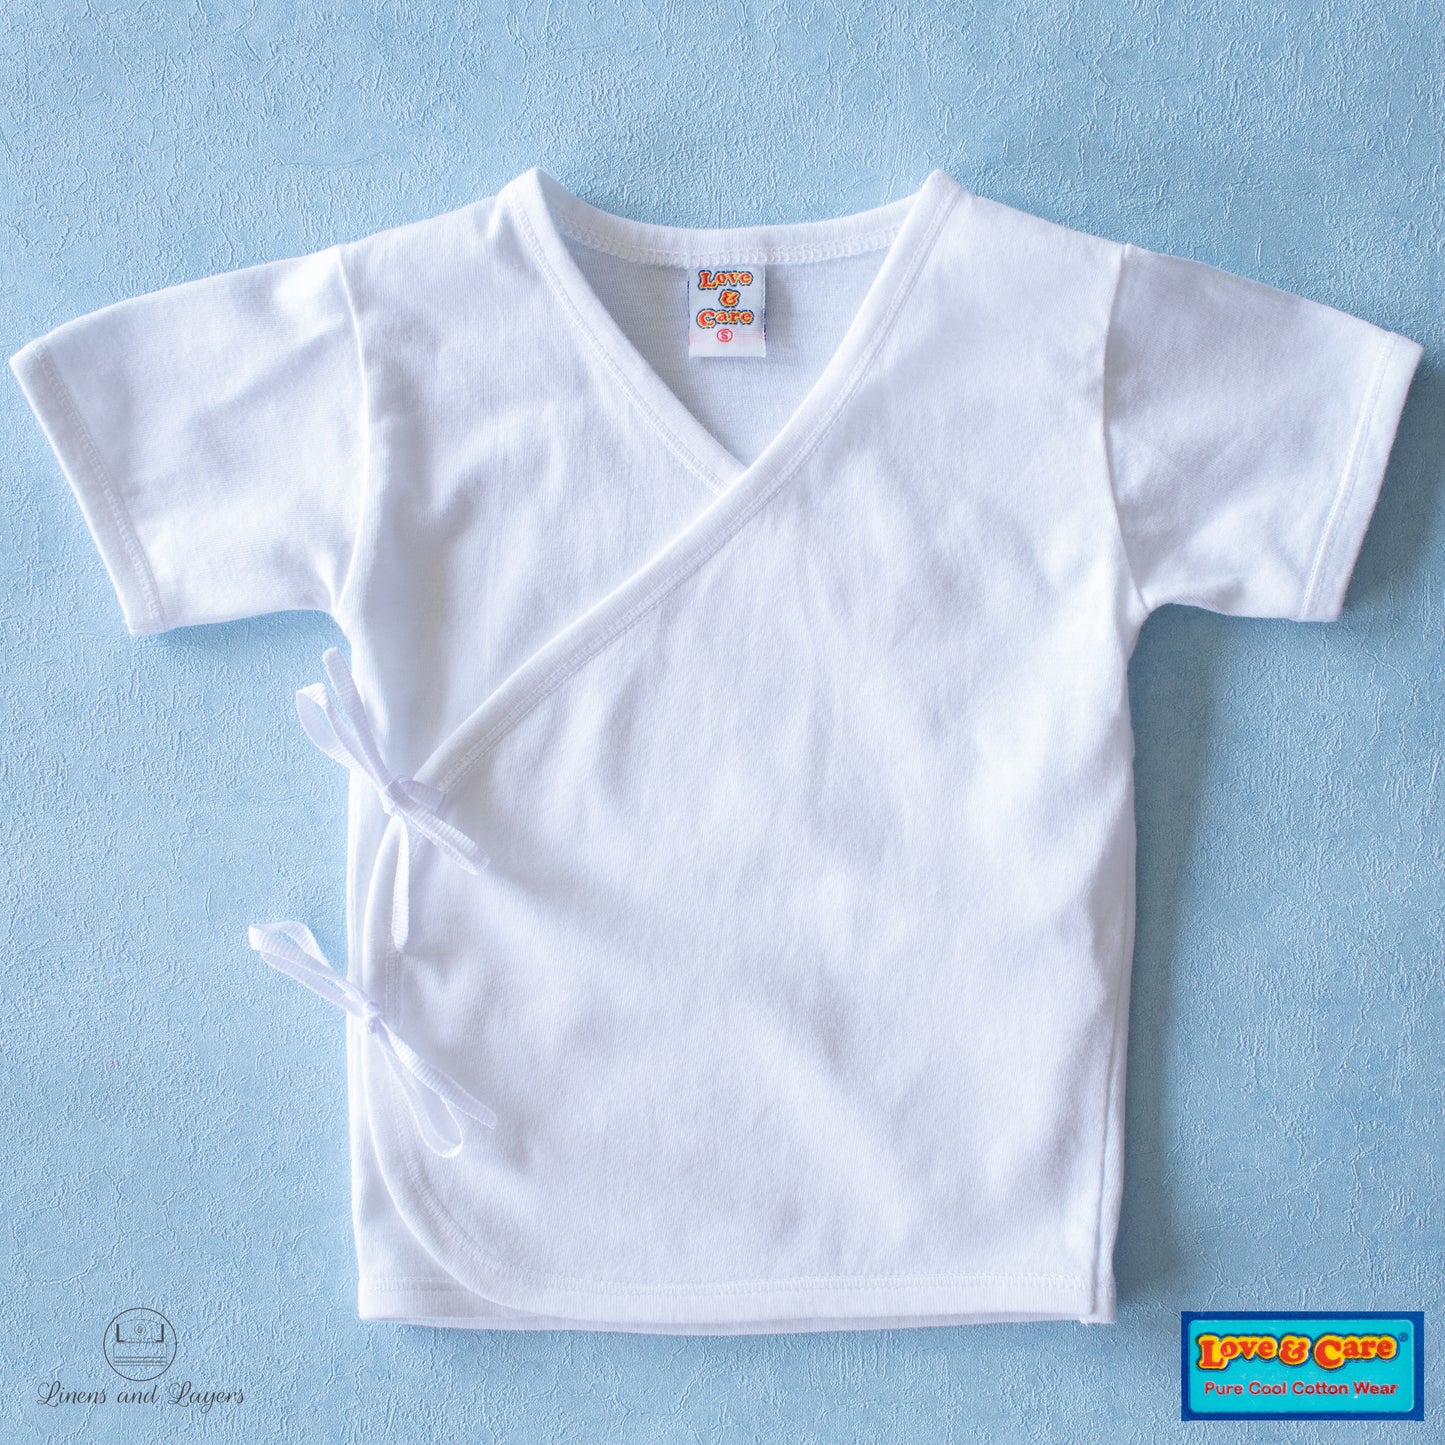 Love & Care - White Pure Cotton Newborn Baby Tie-side - Short Sleeves